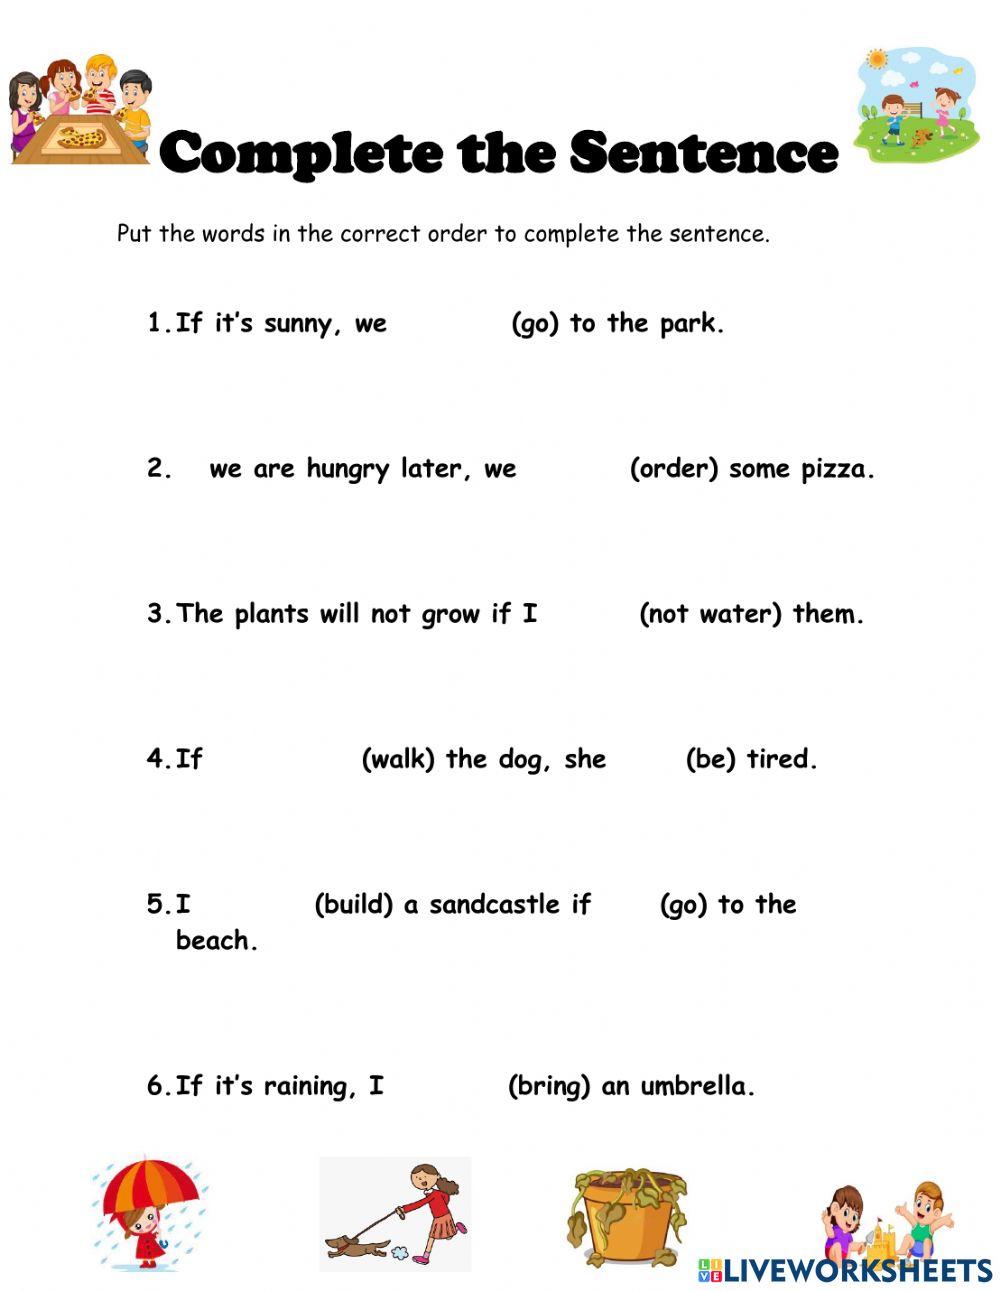 Complete the Sentence